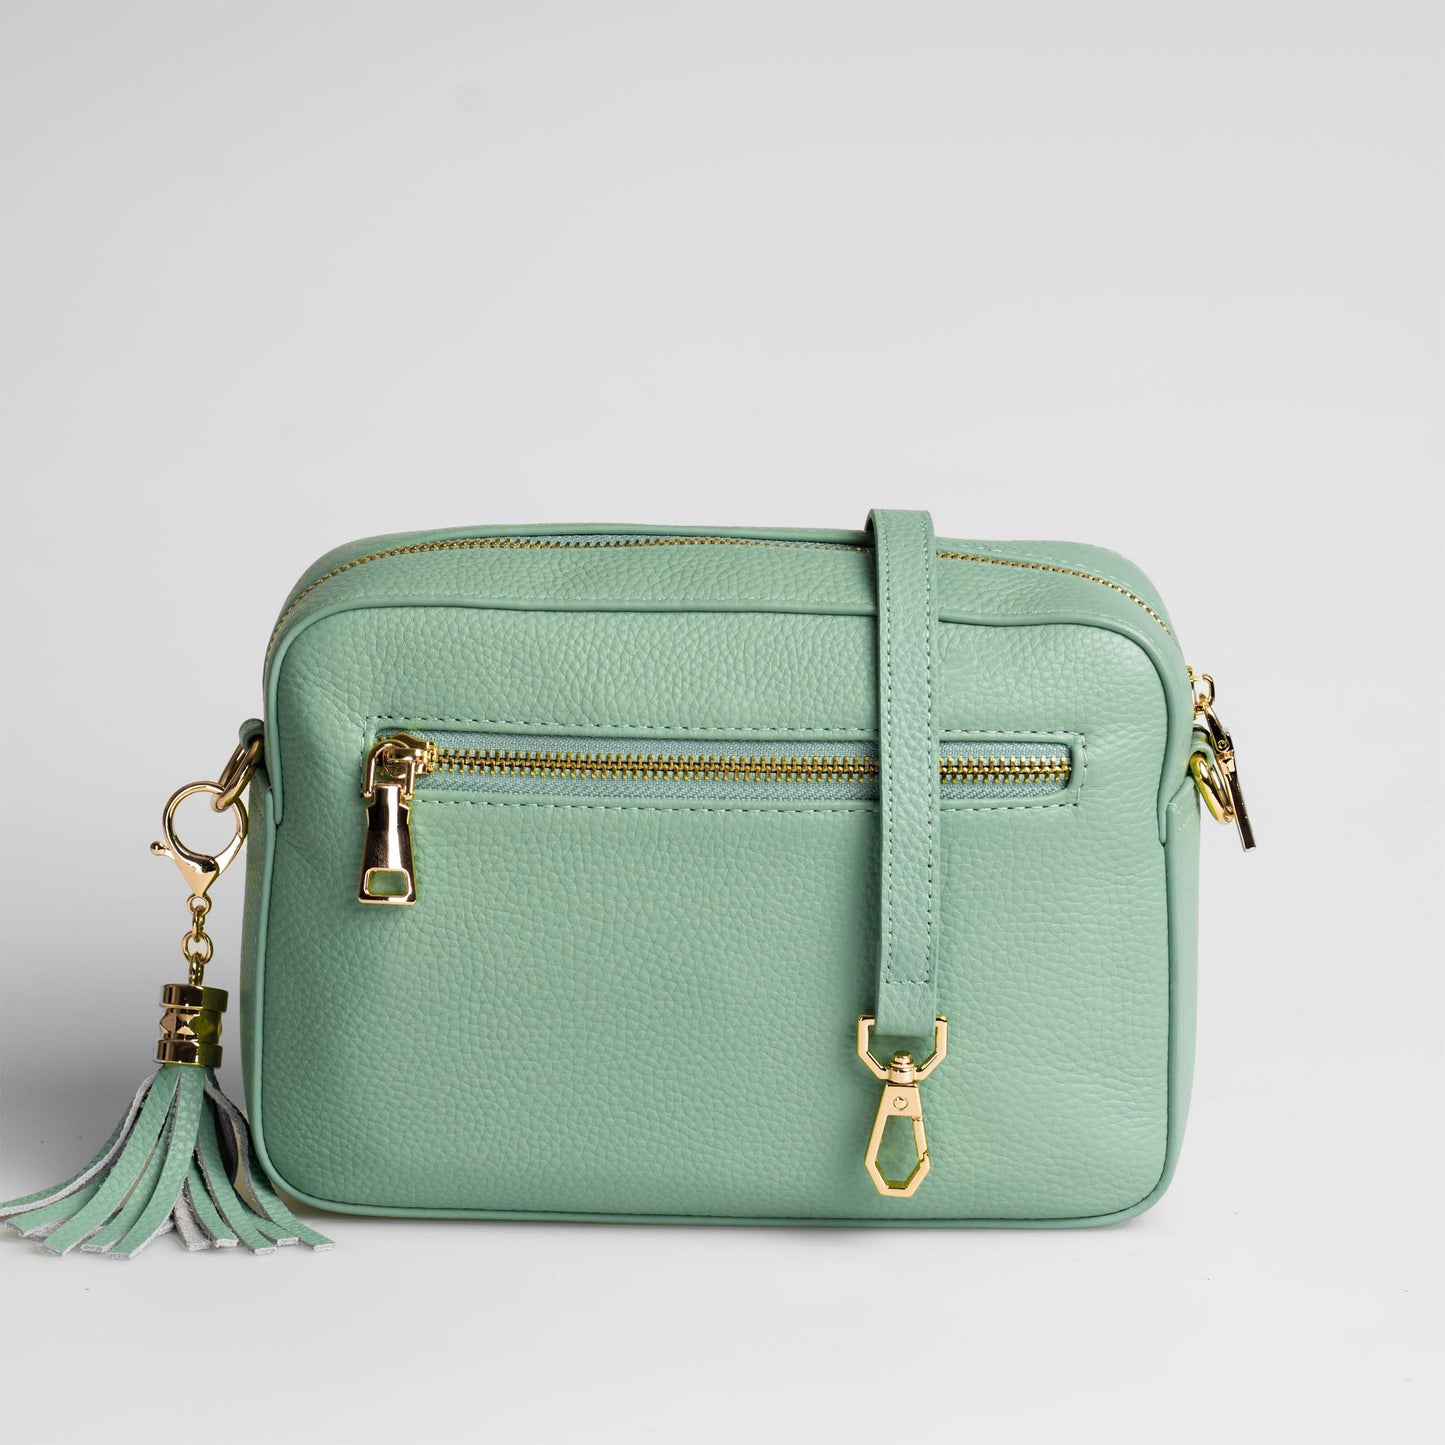 Matching Leather Strap - Mint Green